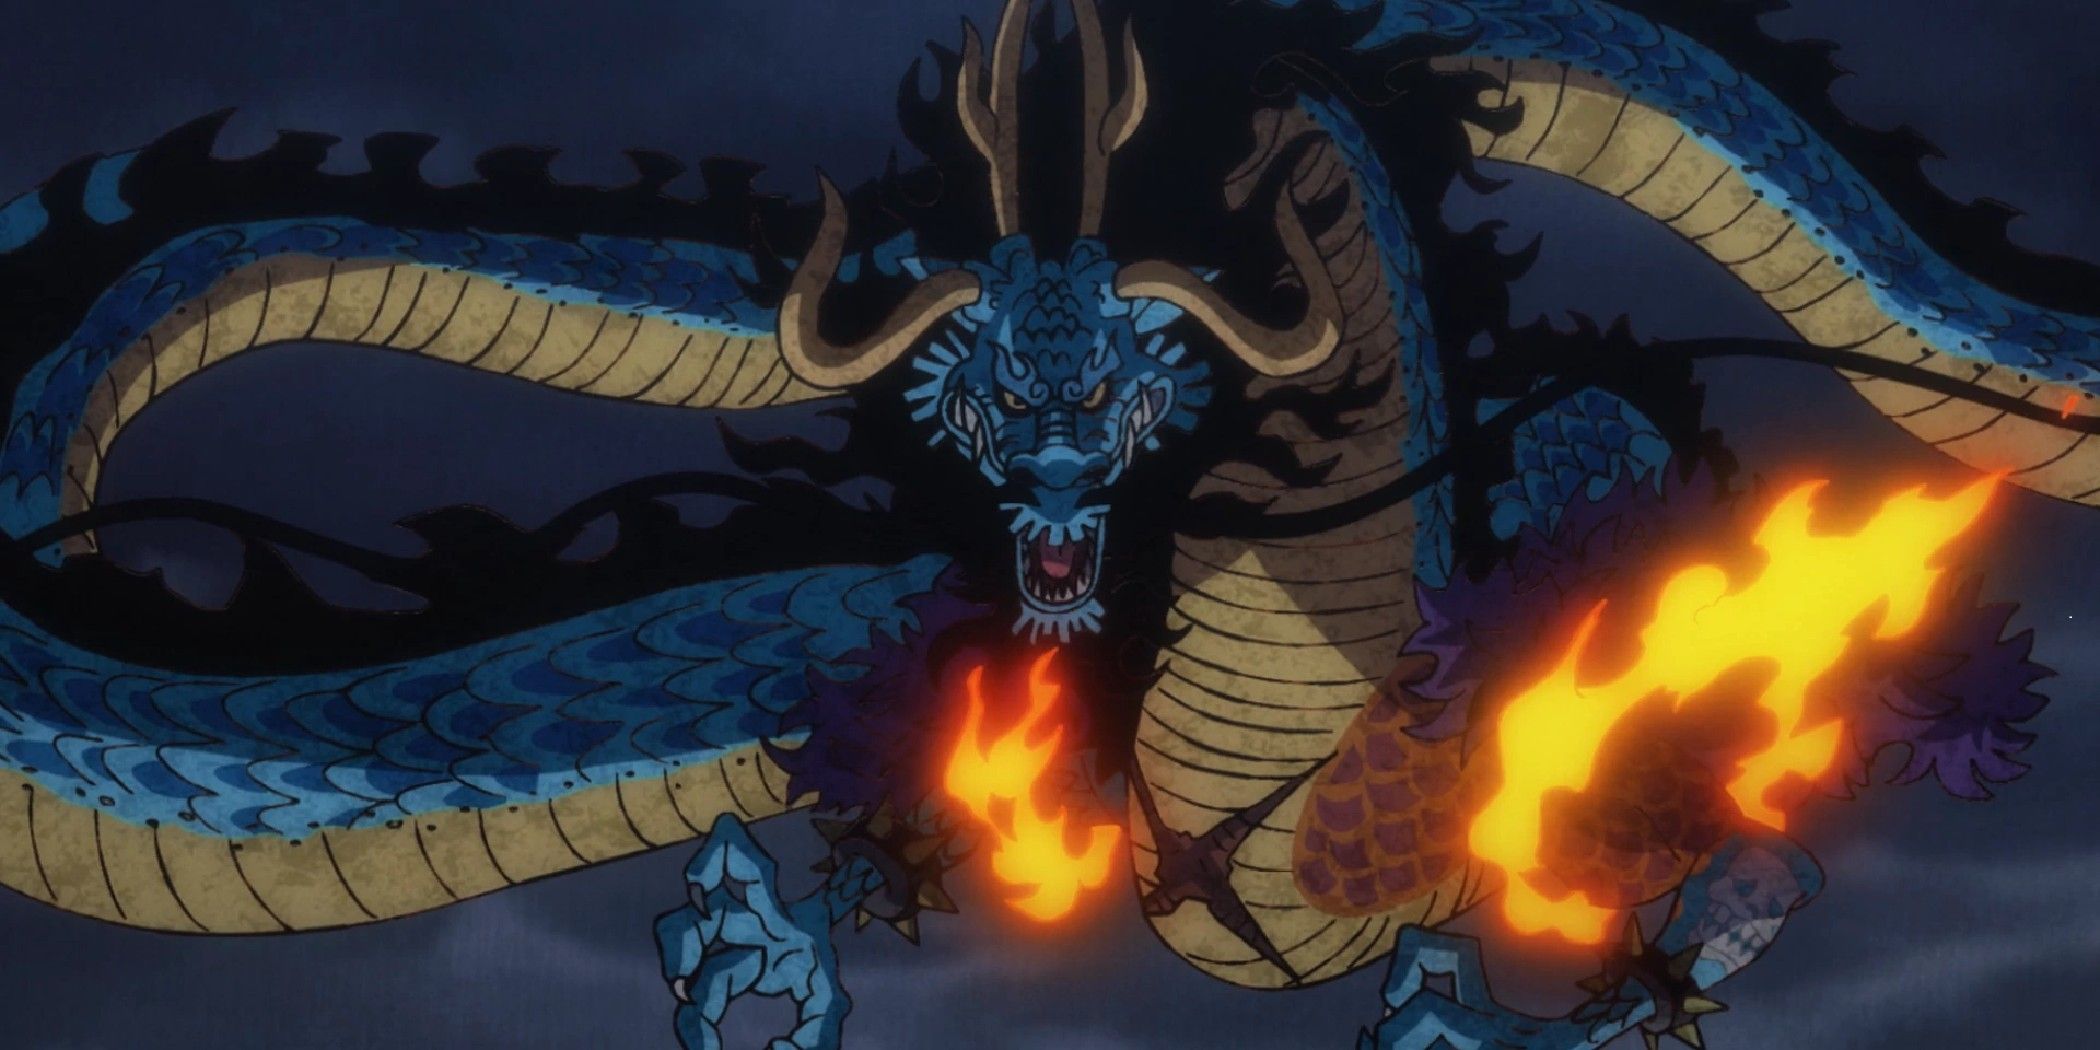 Kaido's Dragon Form from the One Piece anime.